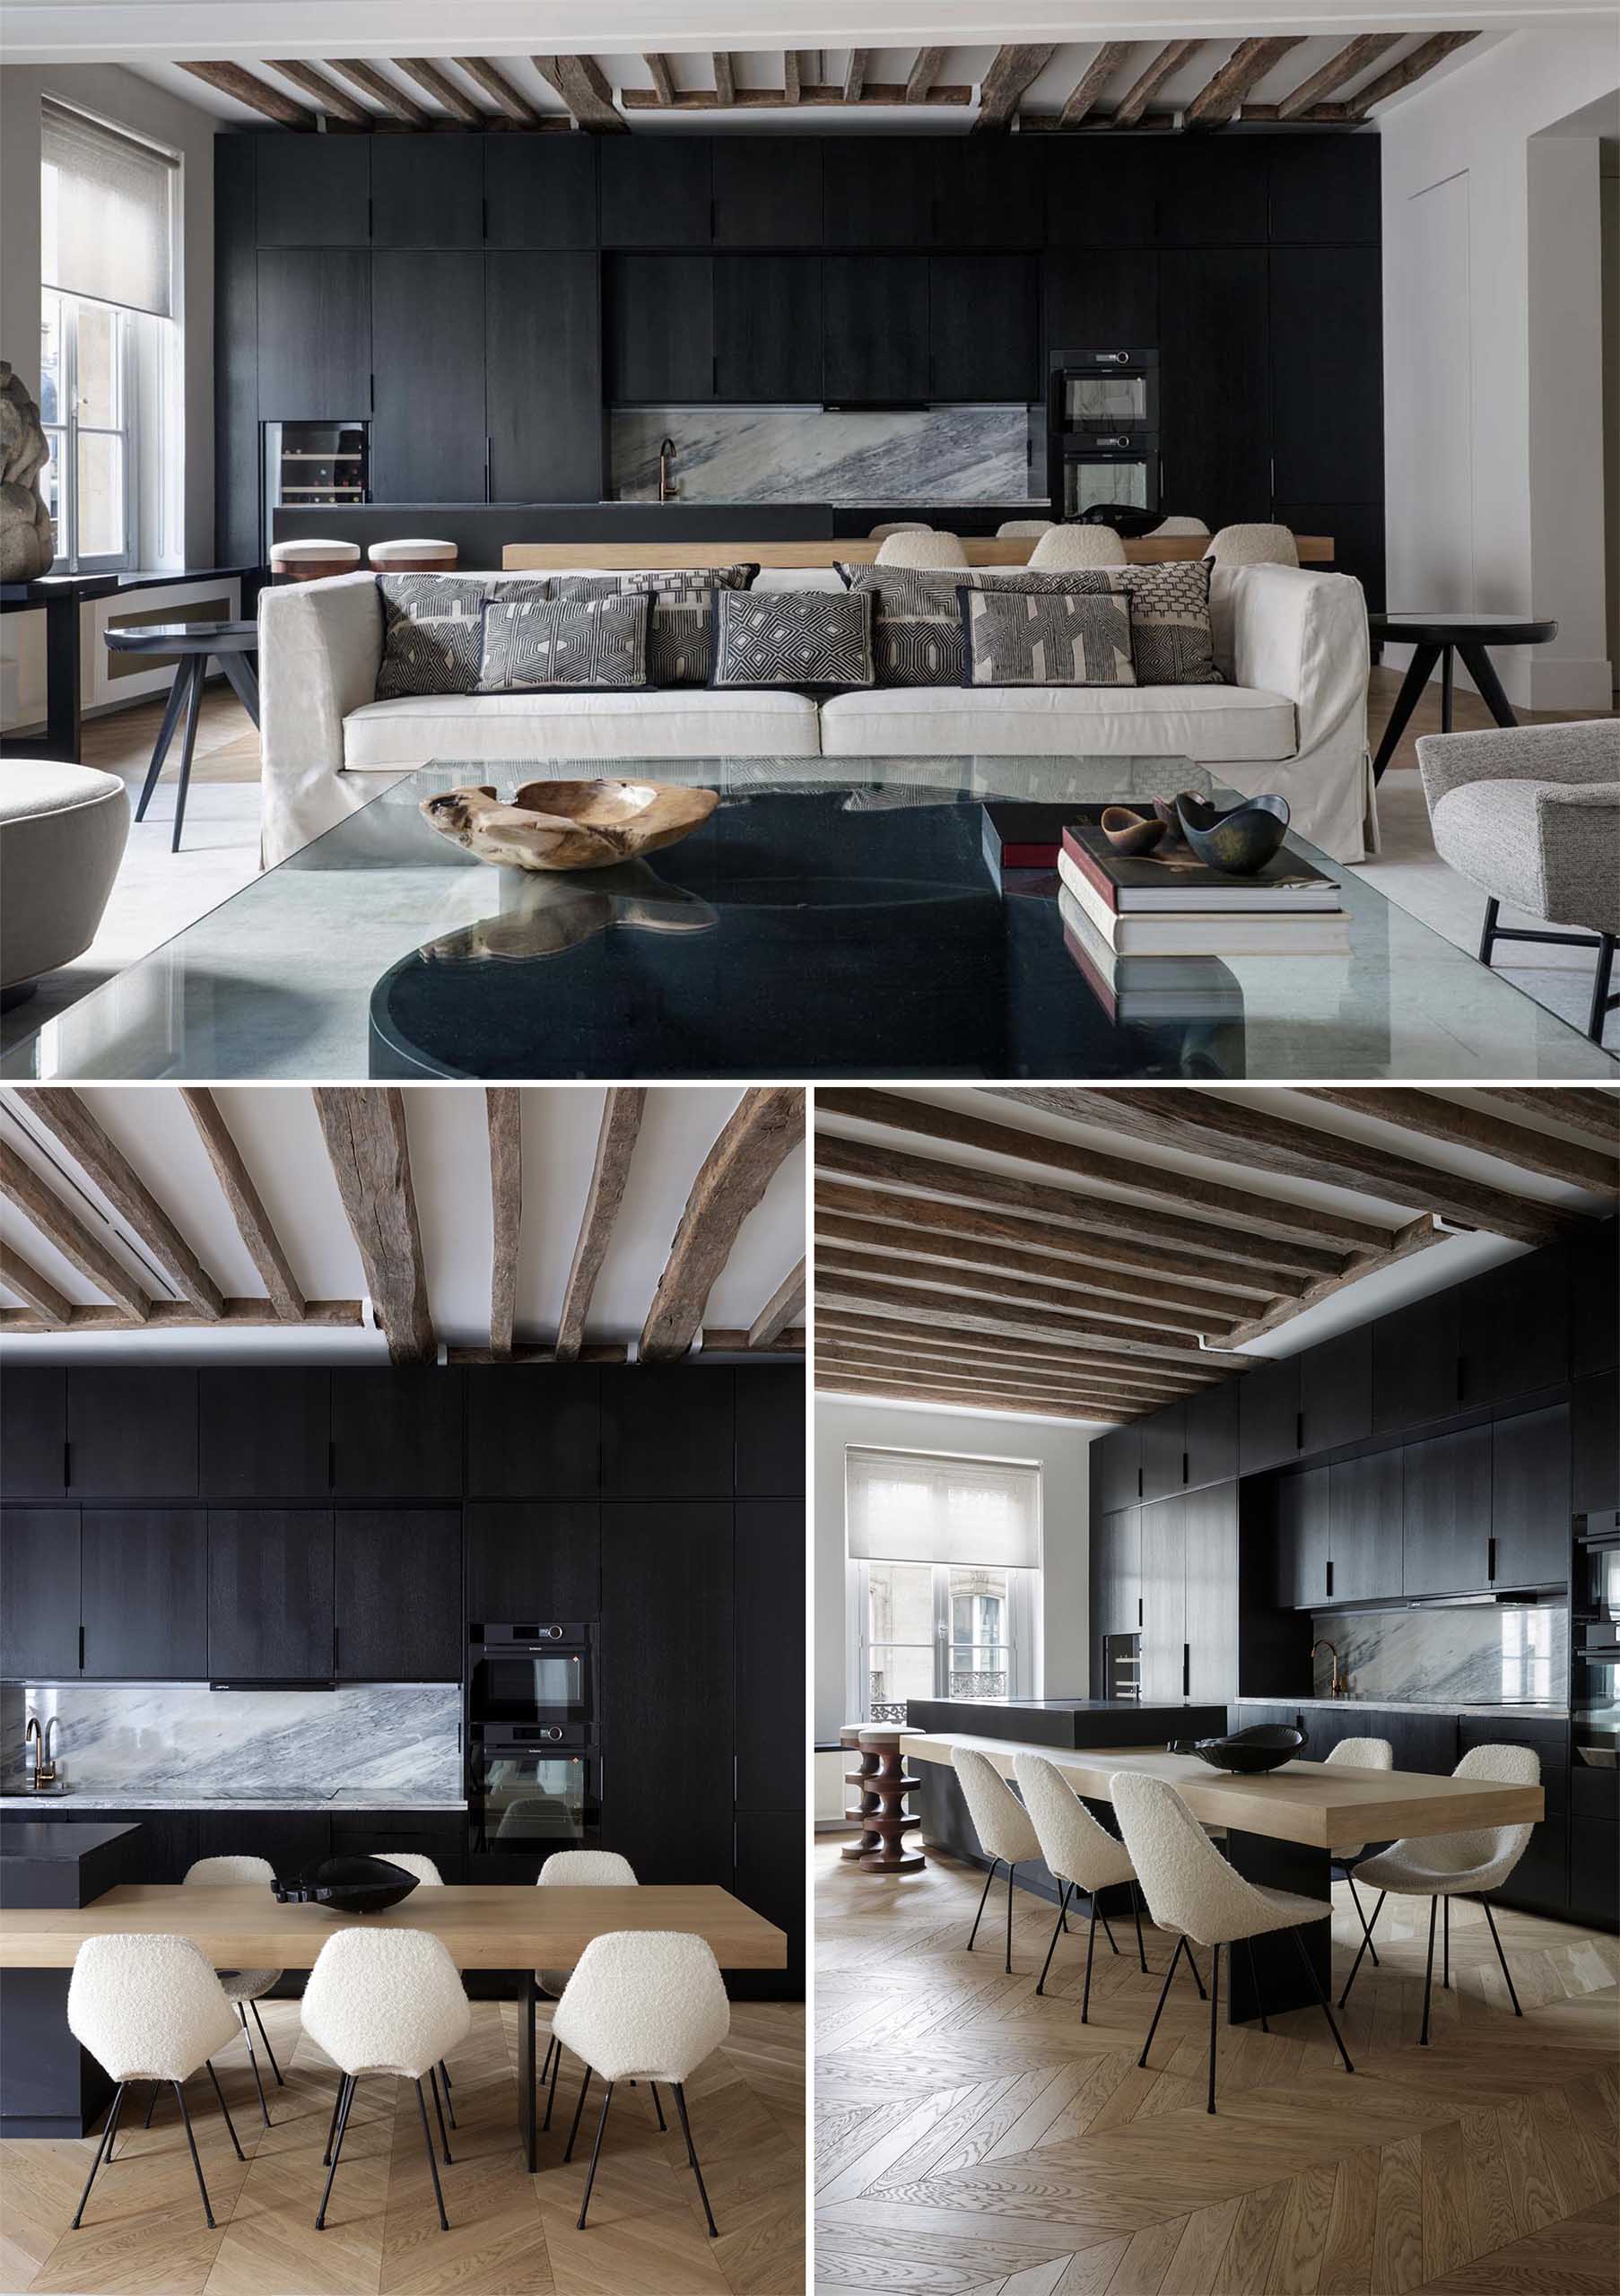 Studio Arthur Casas together with architect Marina Werfel has designed the interiors of a modern apartment in Paris, France, that includes a striking matte black kitchen.